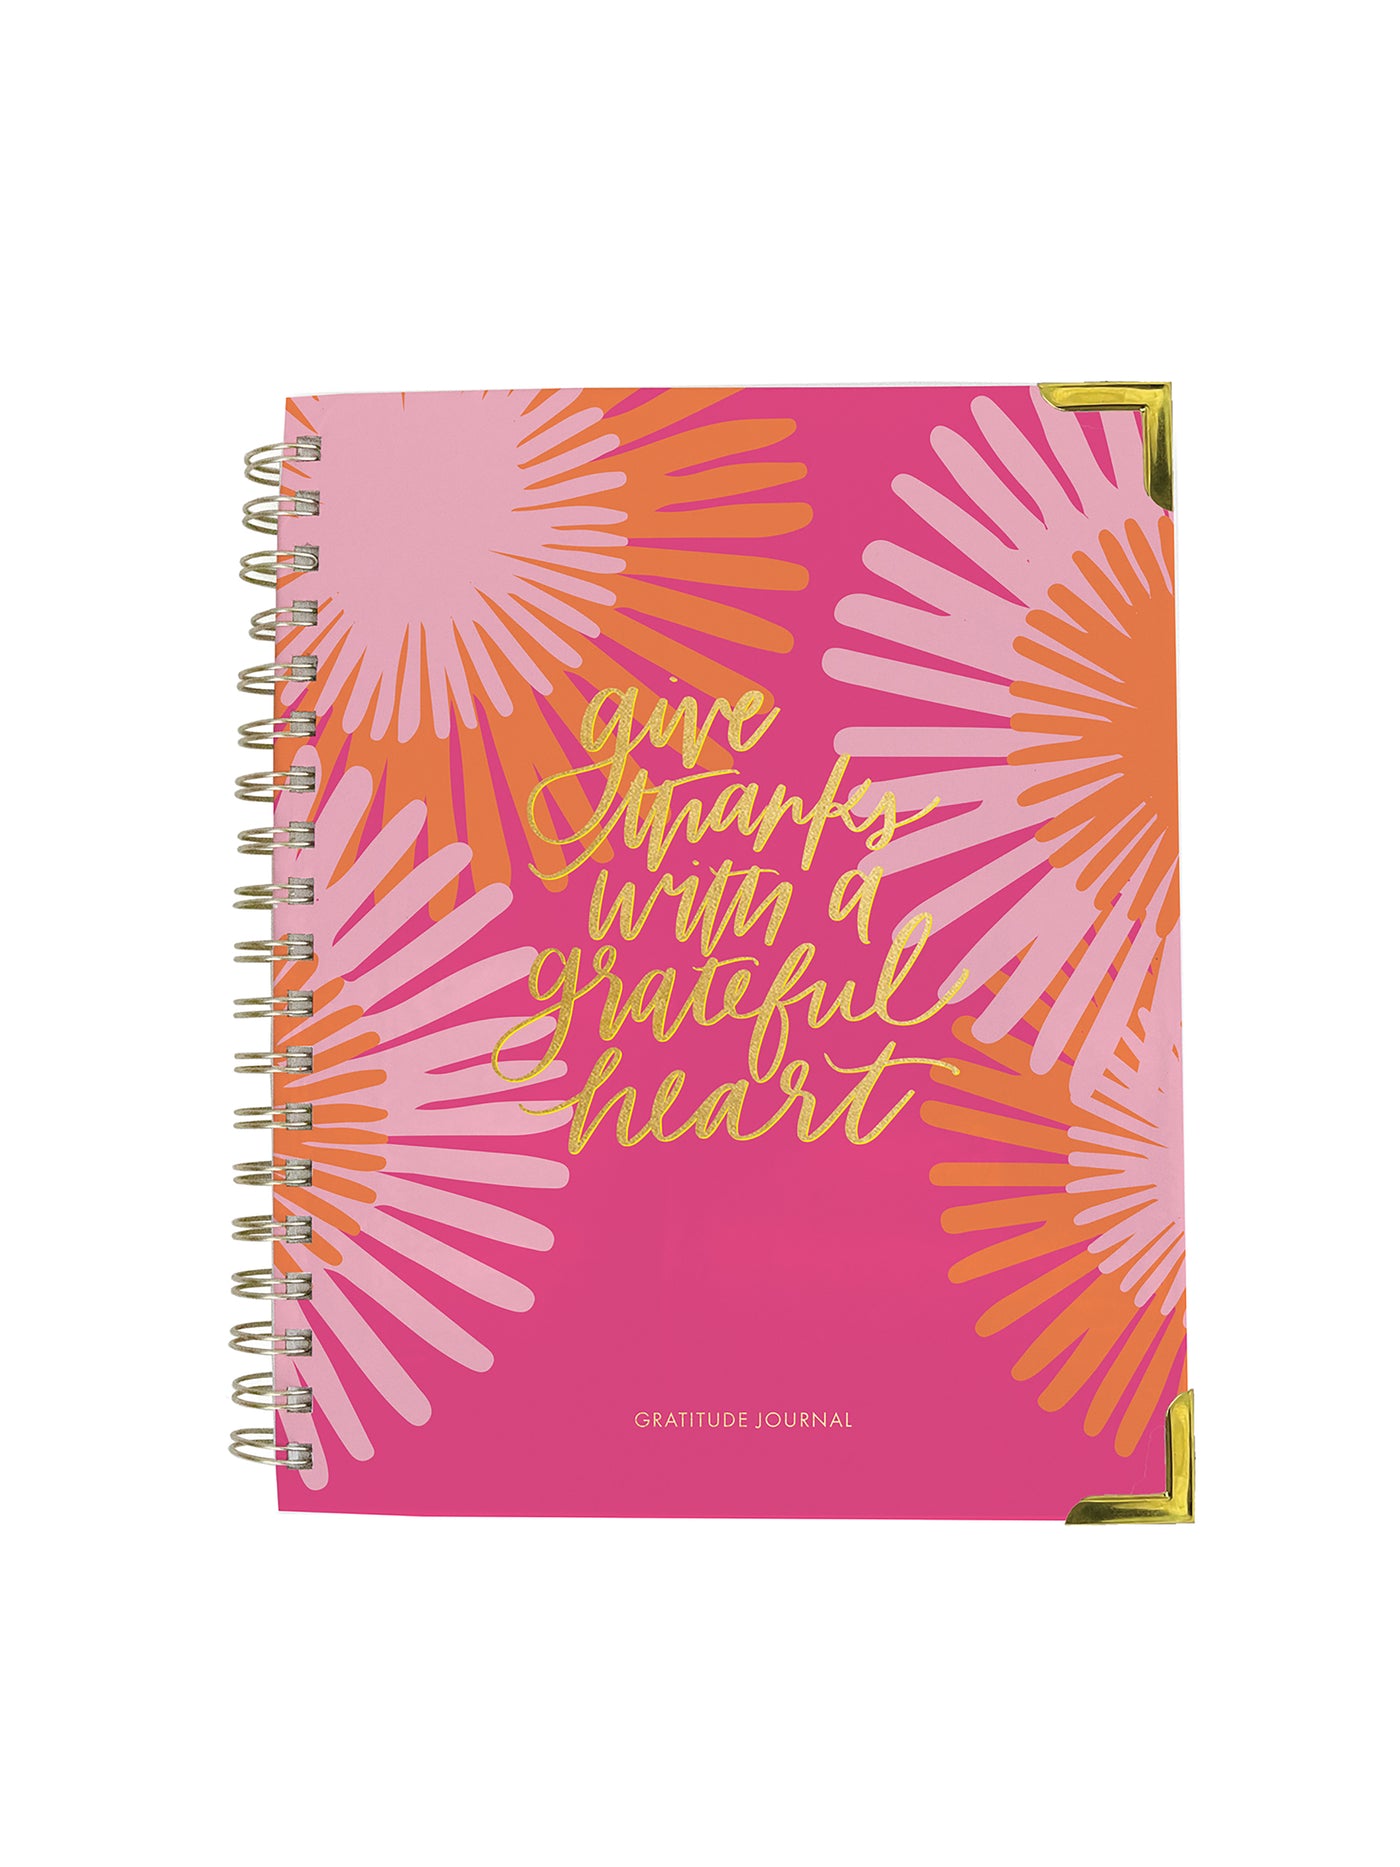 Give Thanks | Gratitude Journal - Mary Square, LLC